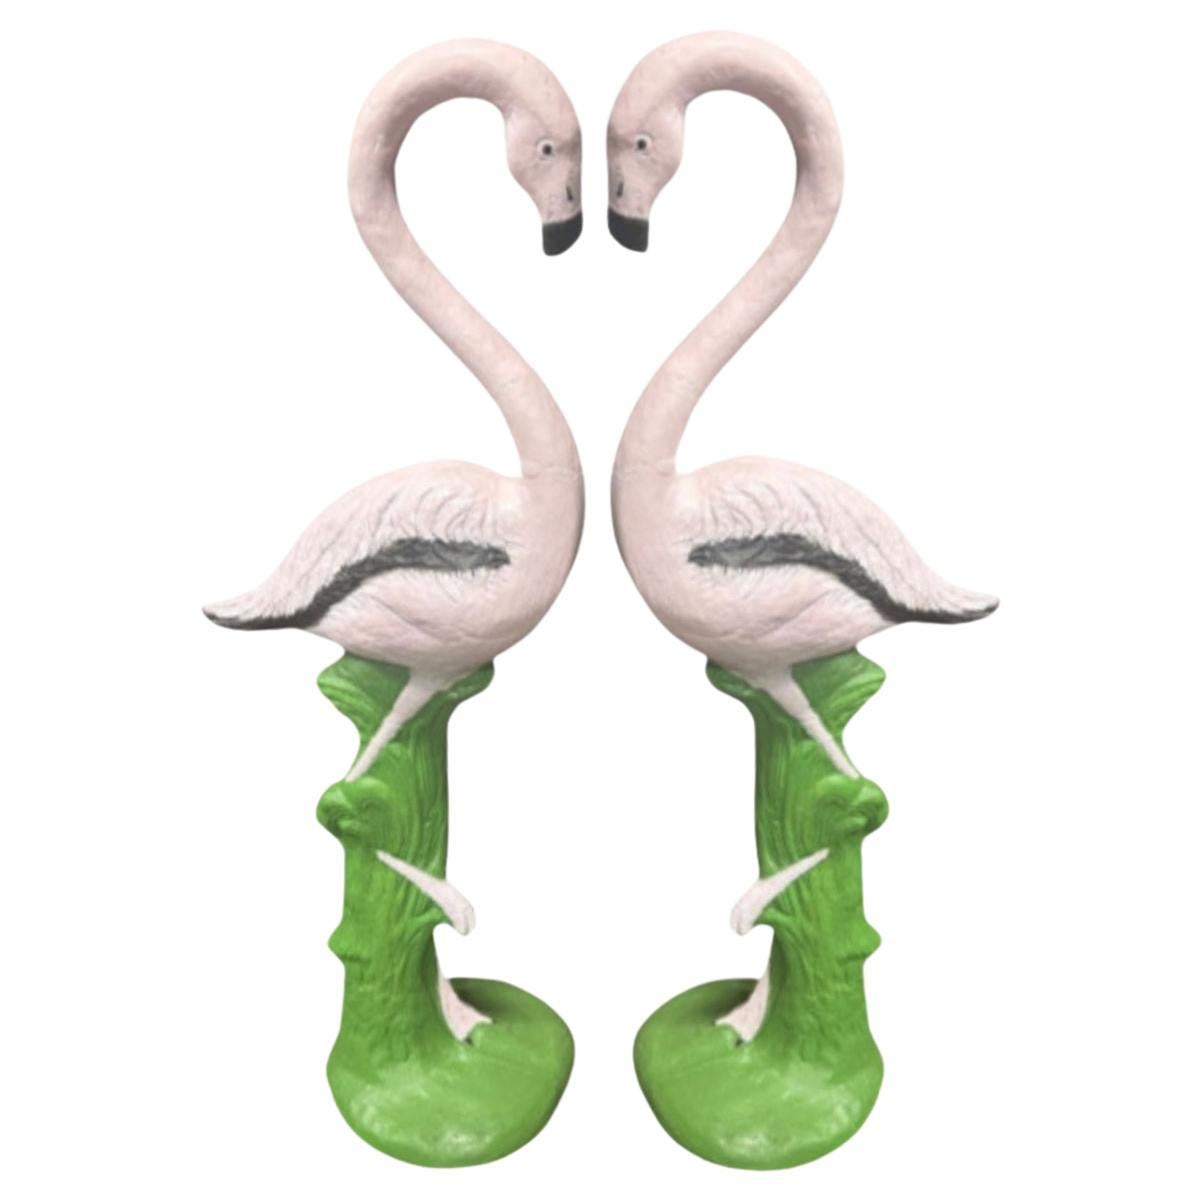 Restored Vintage Life Size Pink Flamingo Statues - Full Size Pair